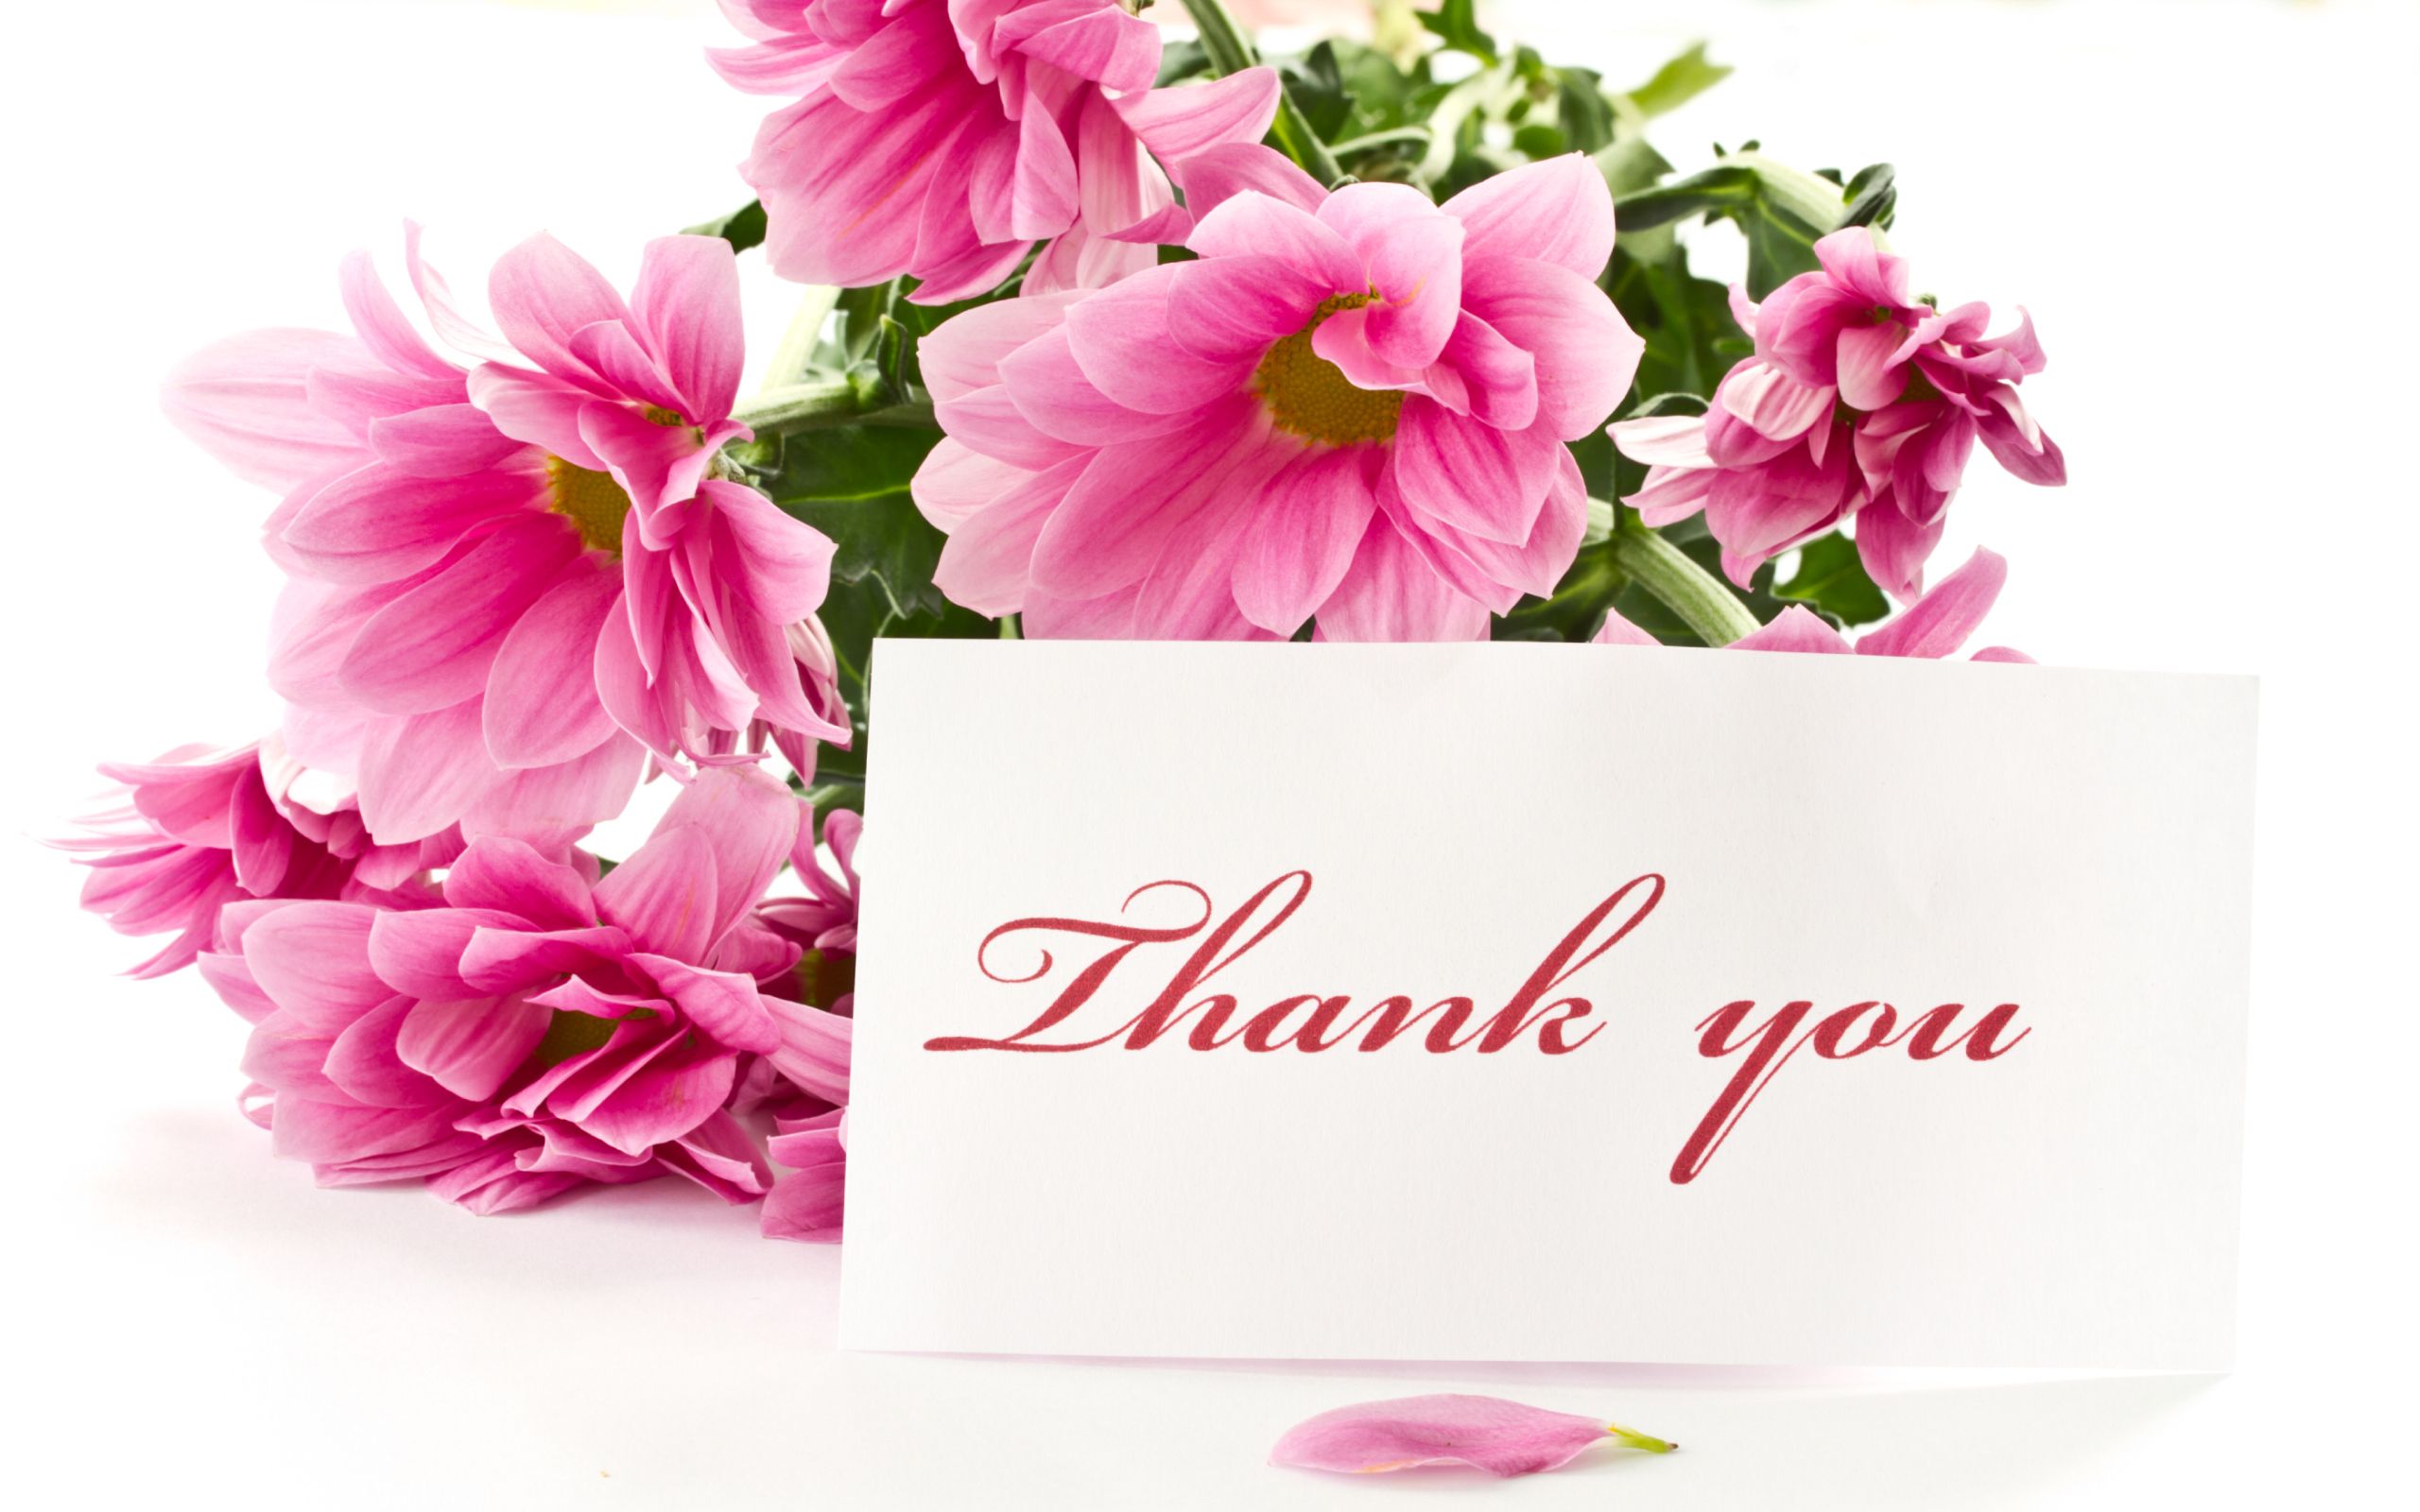 Thank You colorful text hd wallpapers | Wallpapers Wide Free